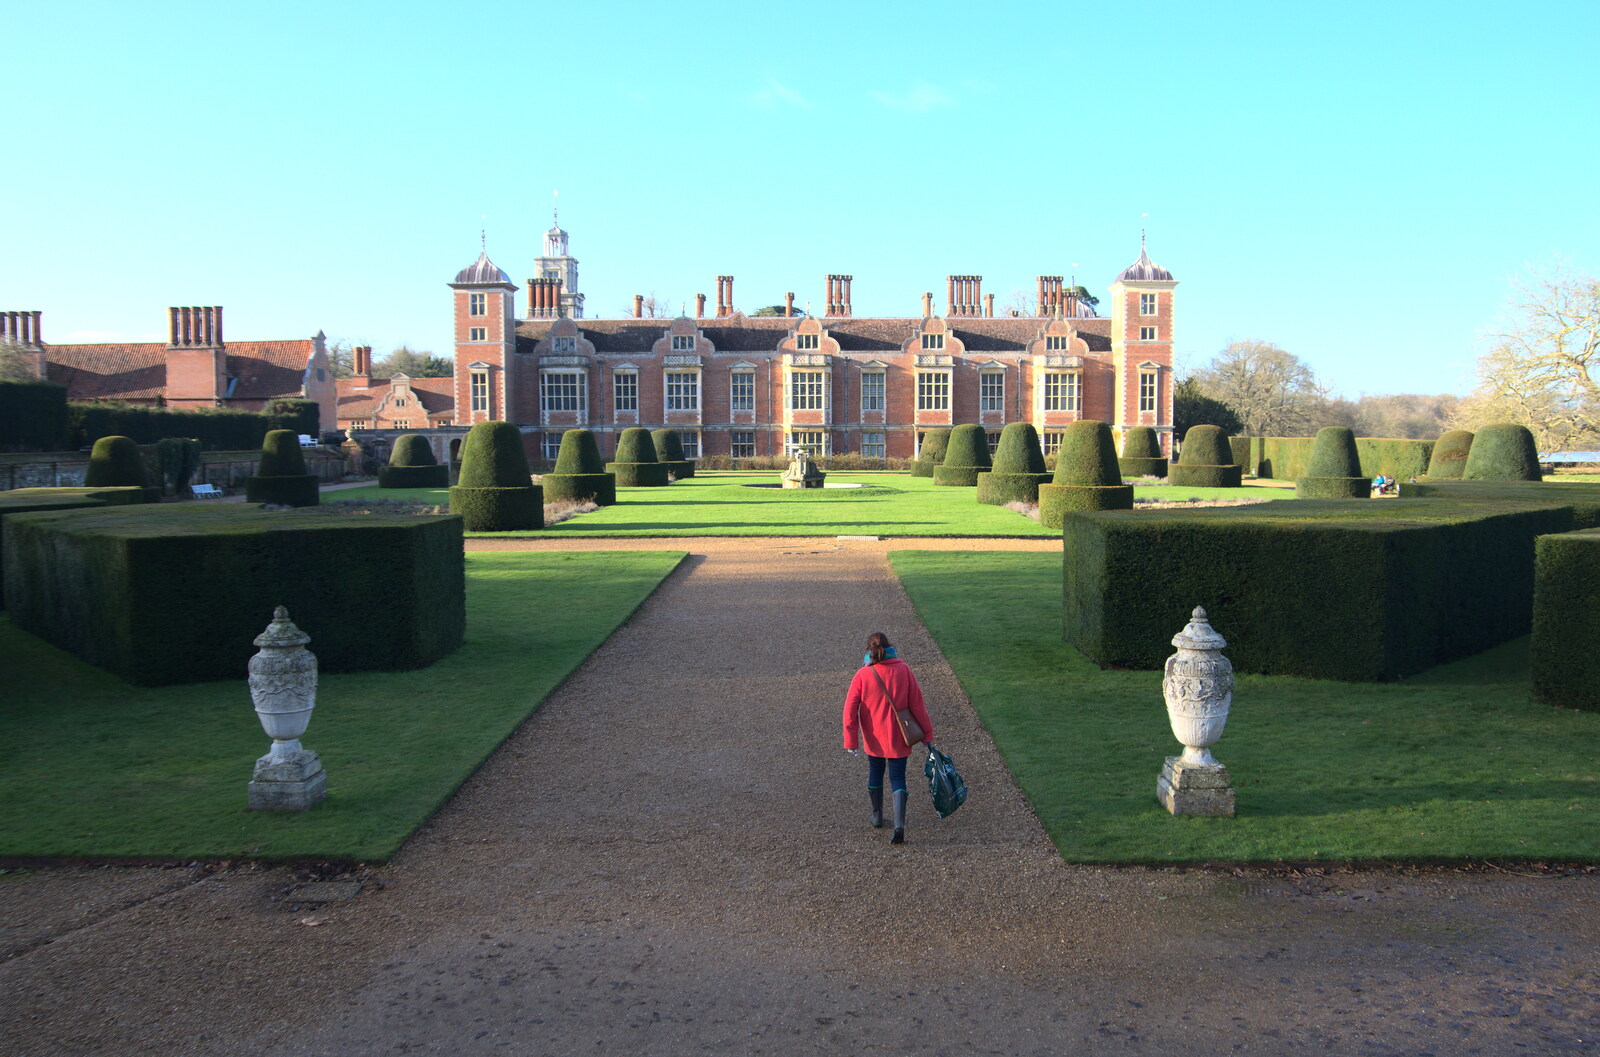 Isobel wanders off from A Visit to Blickling Hall, Aylsham, Norfolk - 9th January 2022